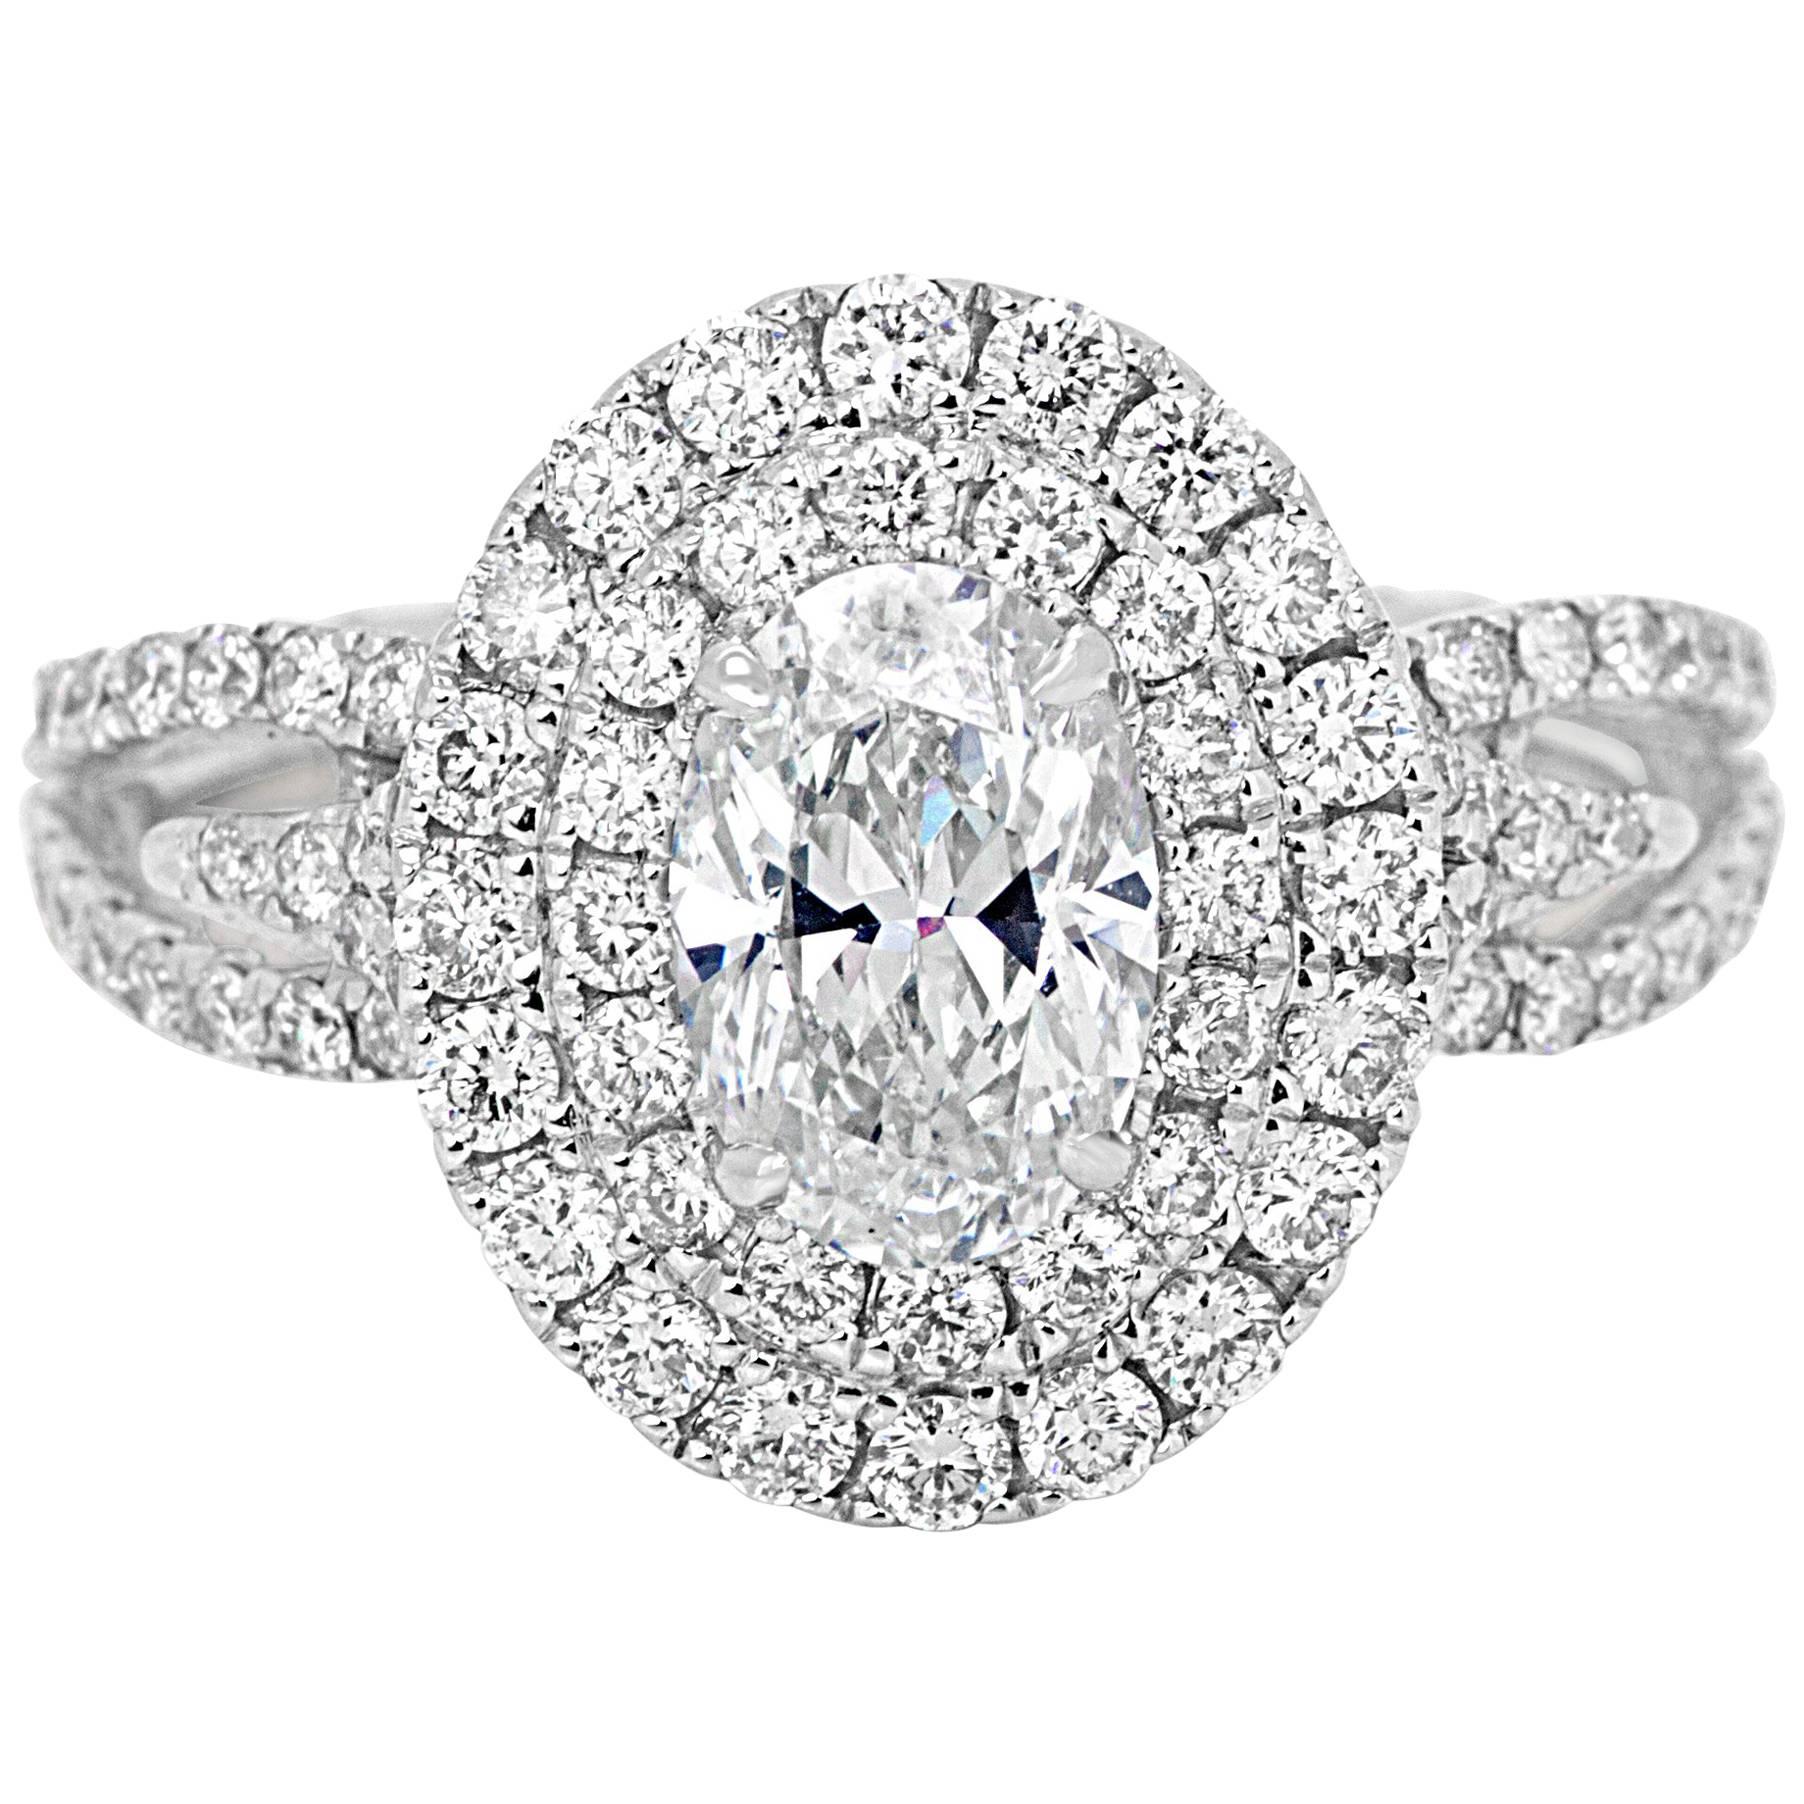 Diamond Oval Double Halo White Gold Engagement Bridal Fashion Cocktail Ring